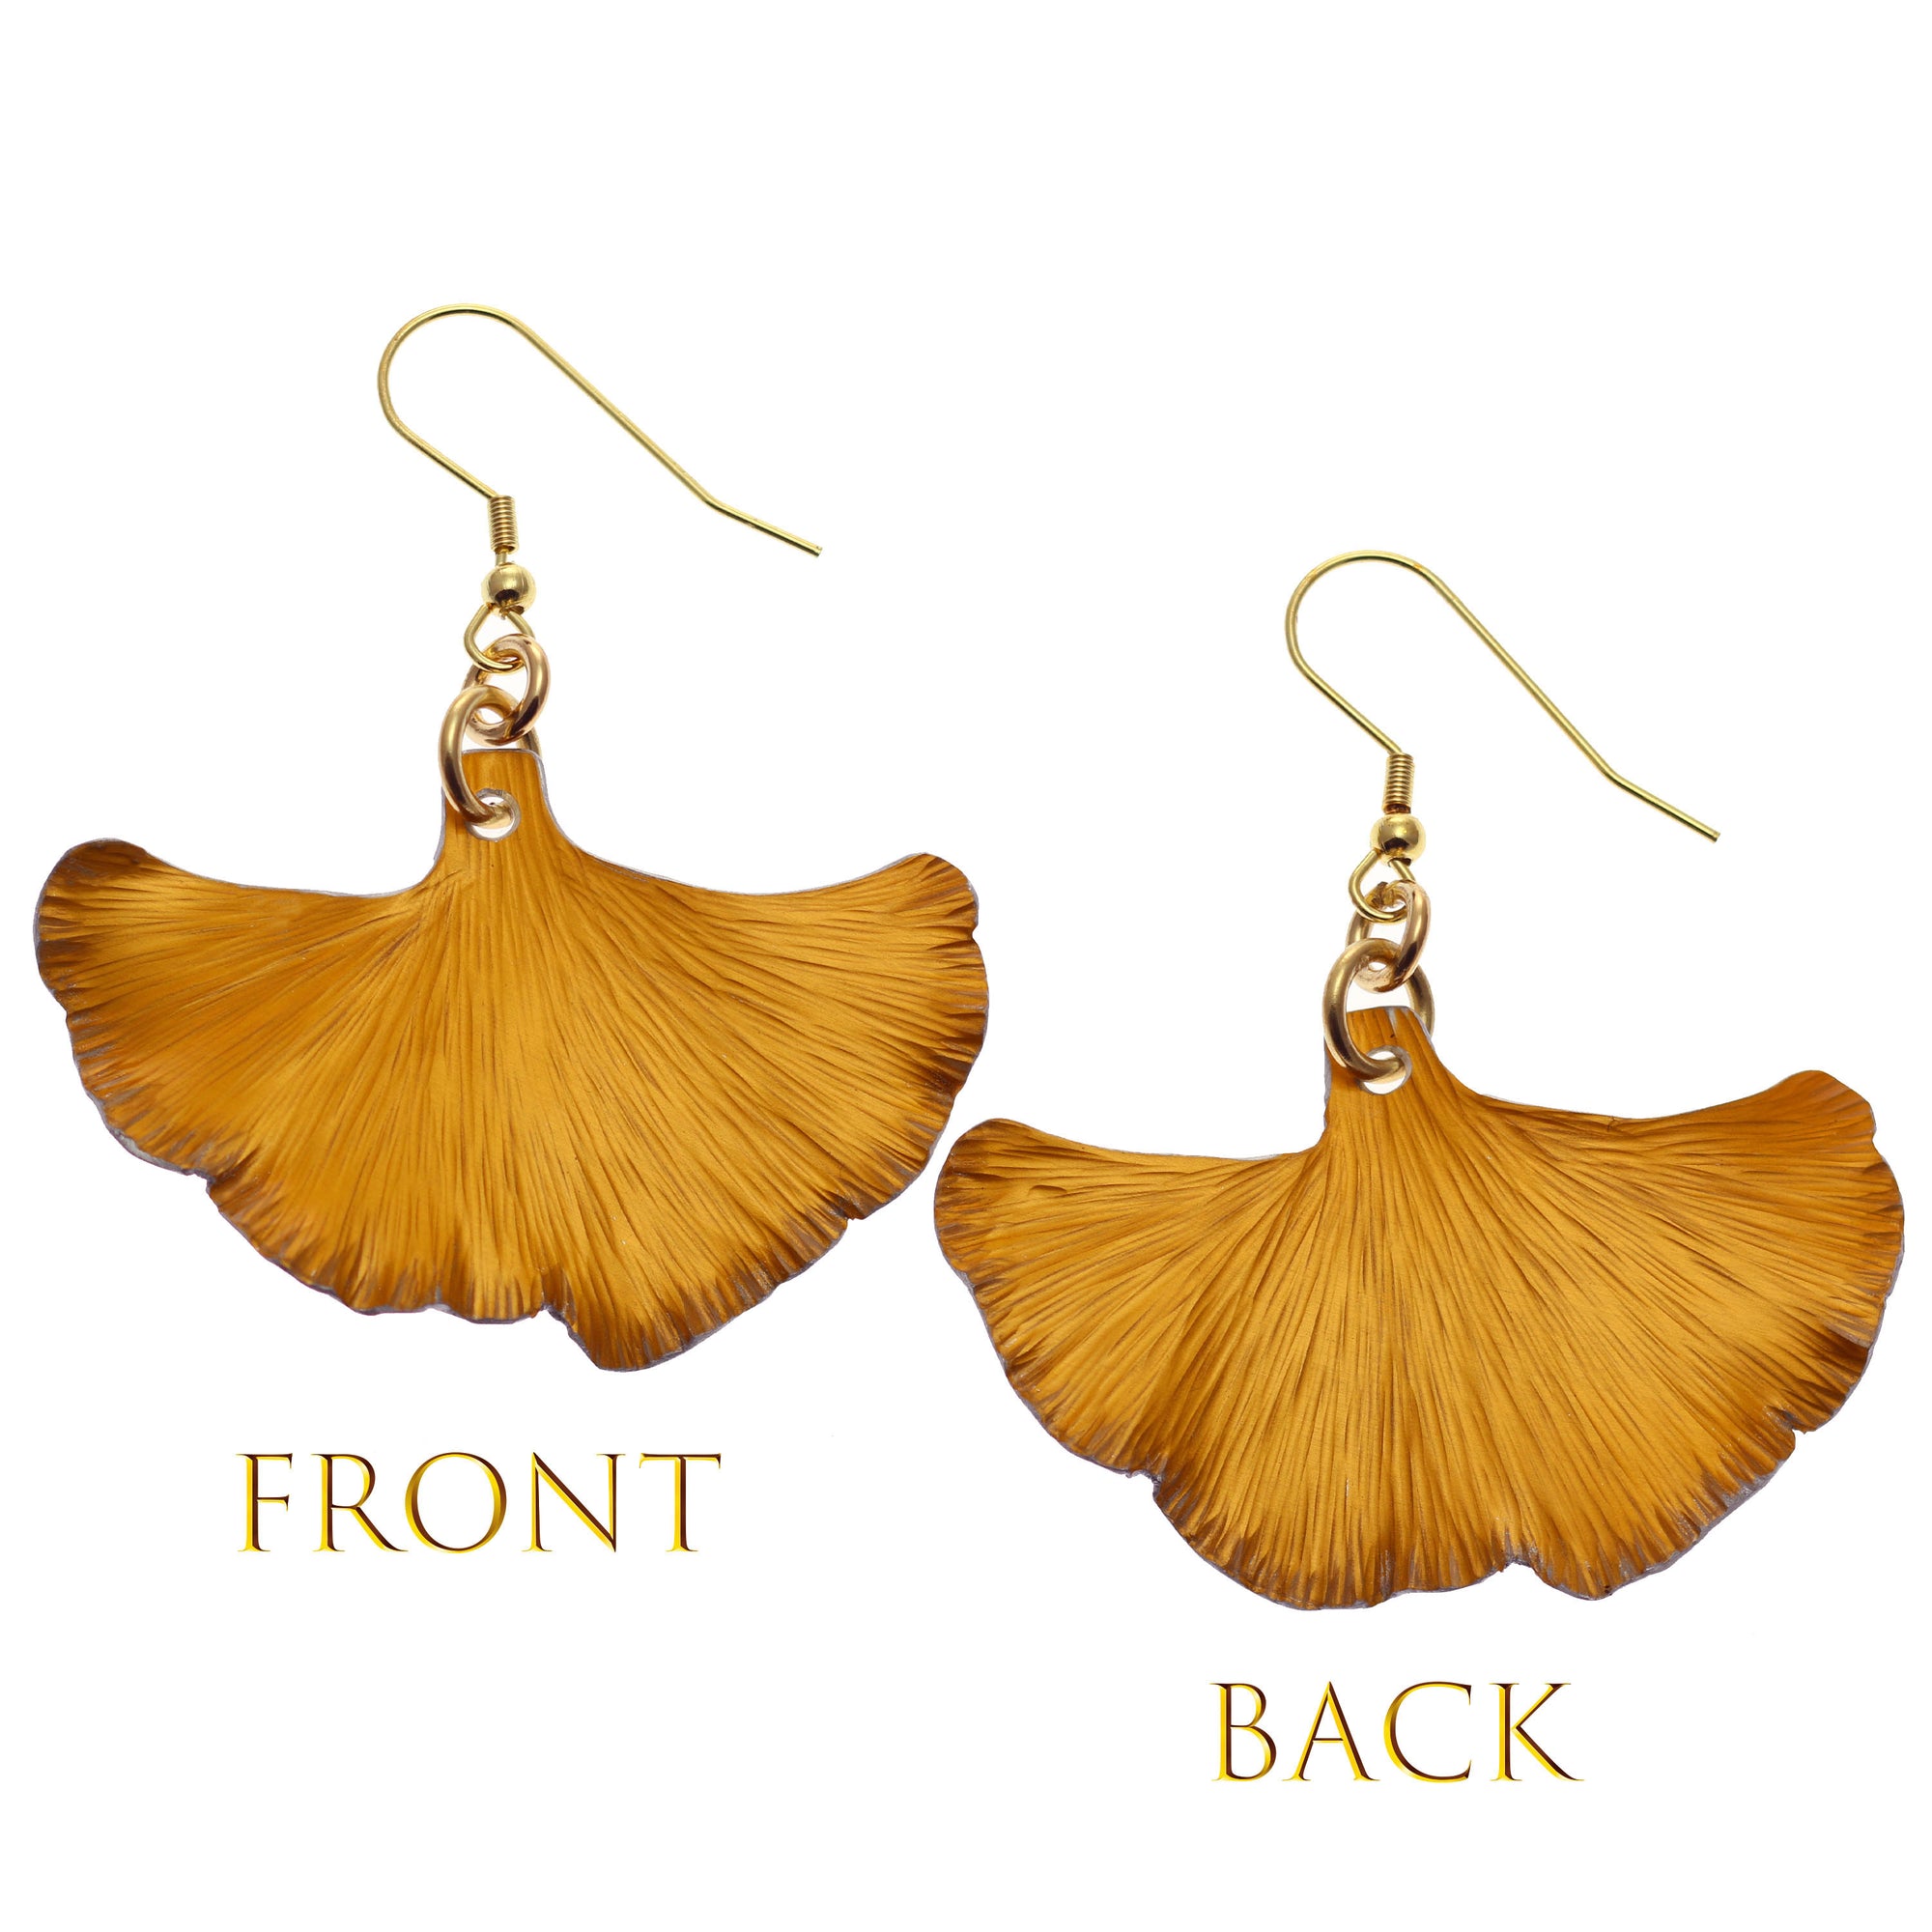 Front and back view of Orange Anodized Aluminum Ginkgo Earrings, showcasing intricate leaf-shaped design, adding elegance to any outfit.